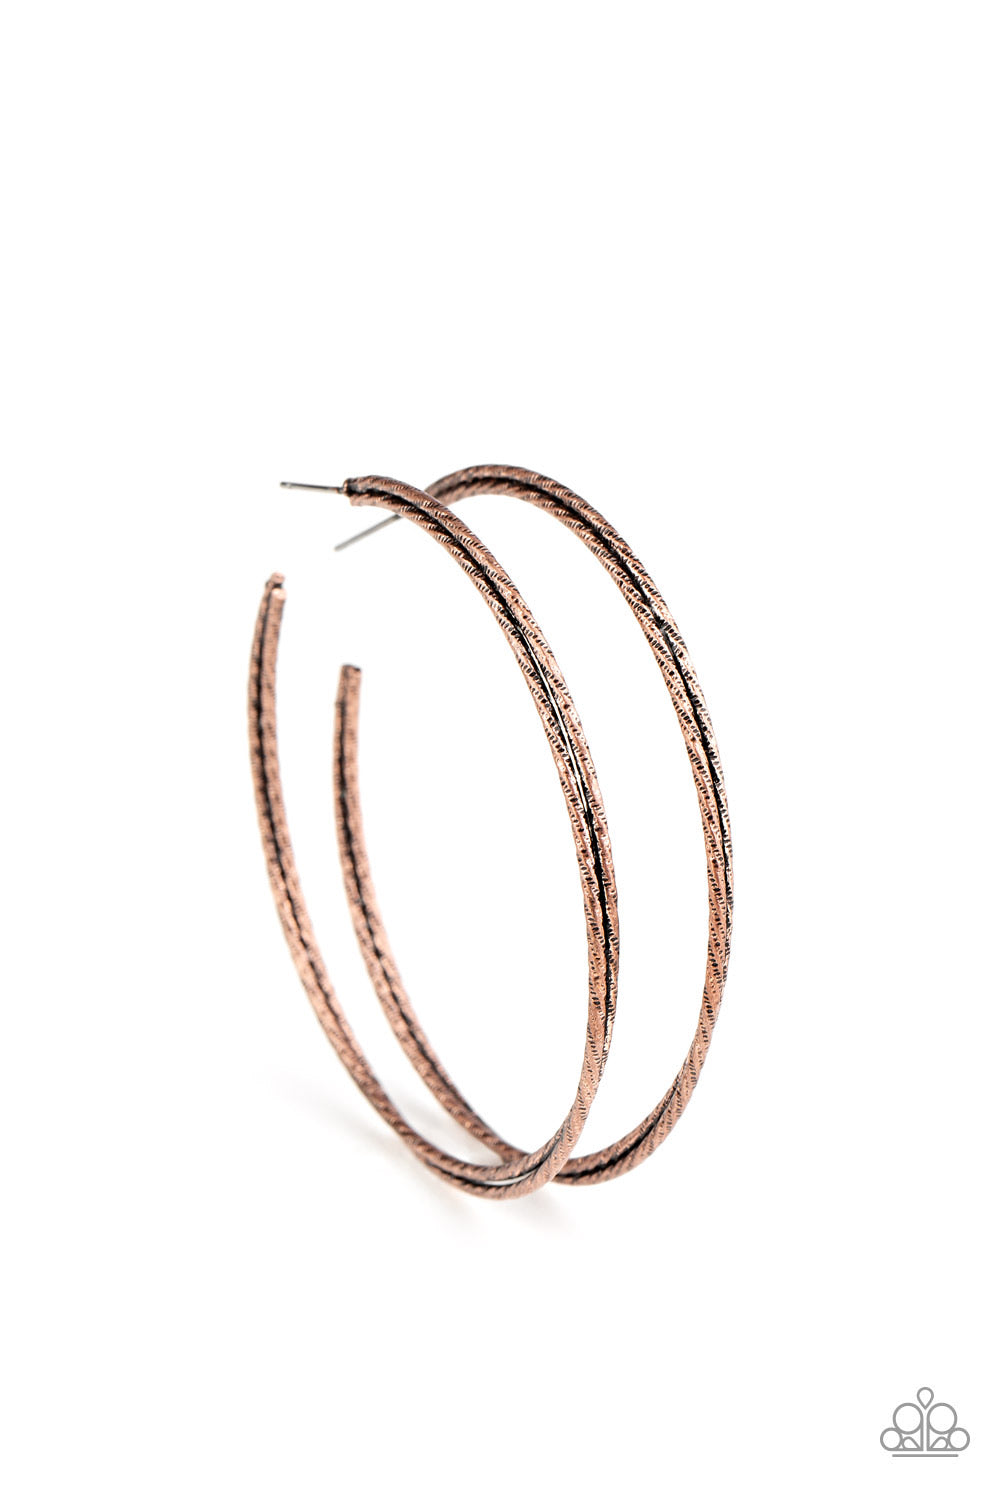 Paparazzi Earrings Curved Couture - Copper